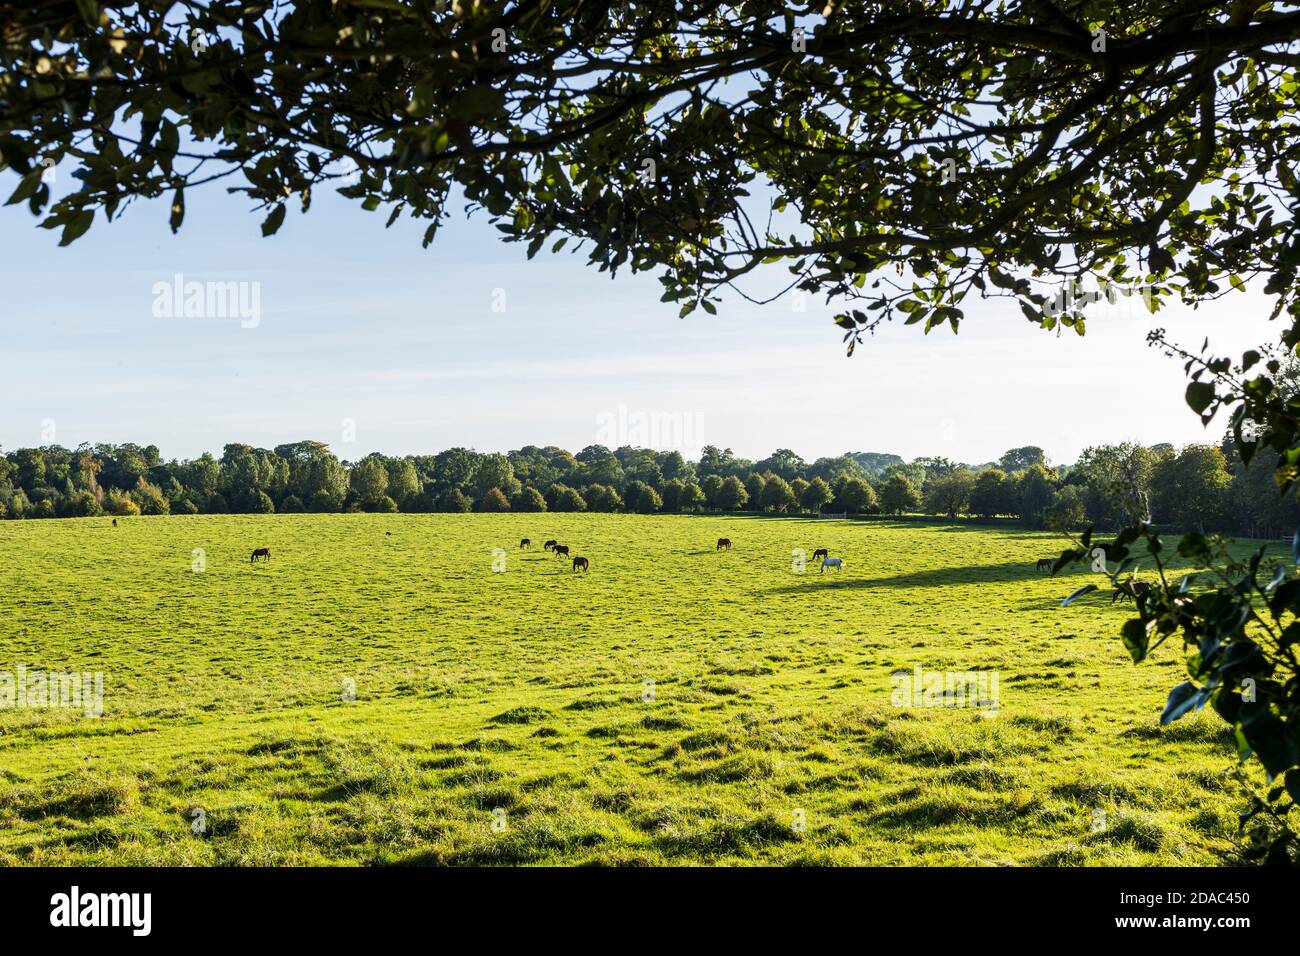 Horses grazing in a field at the estate stud, Palmerstown House, Johnstown, County Kildare, Ireland Stock Photo